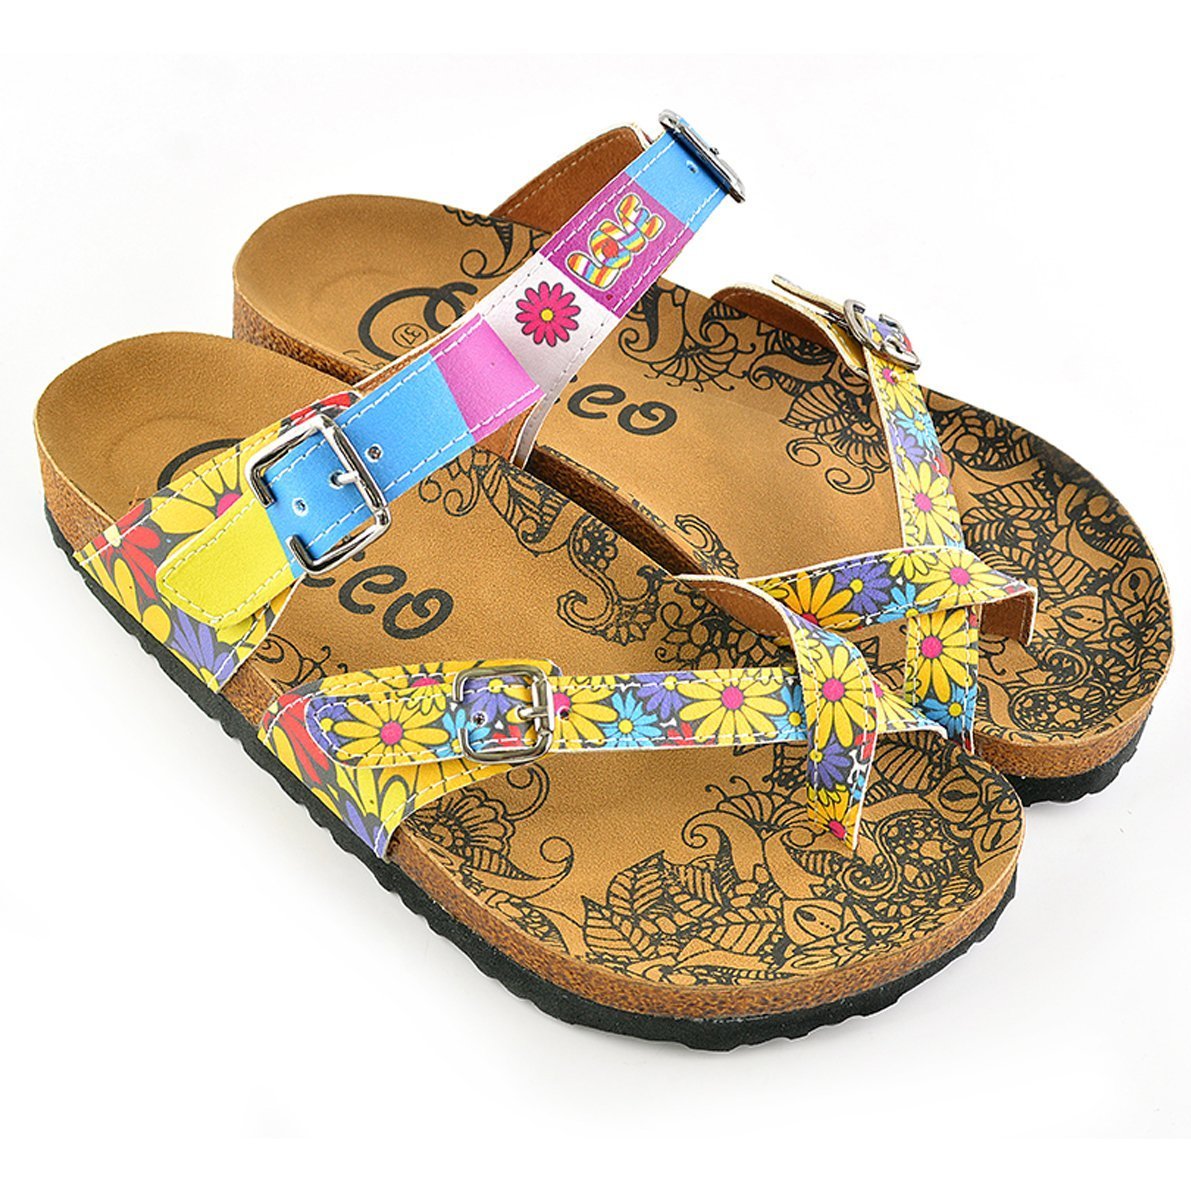 Calceo.co - Produces Sandals & Clogs & Slipers and Shoes